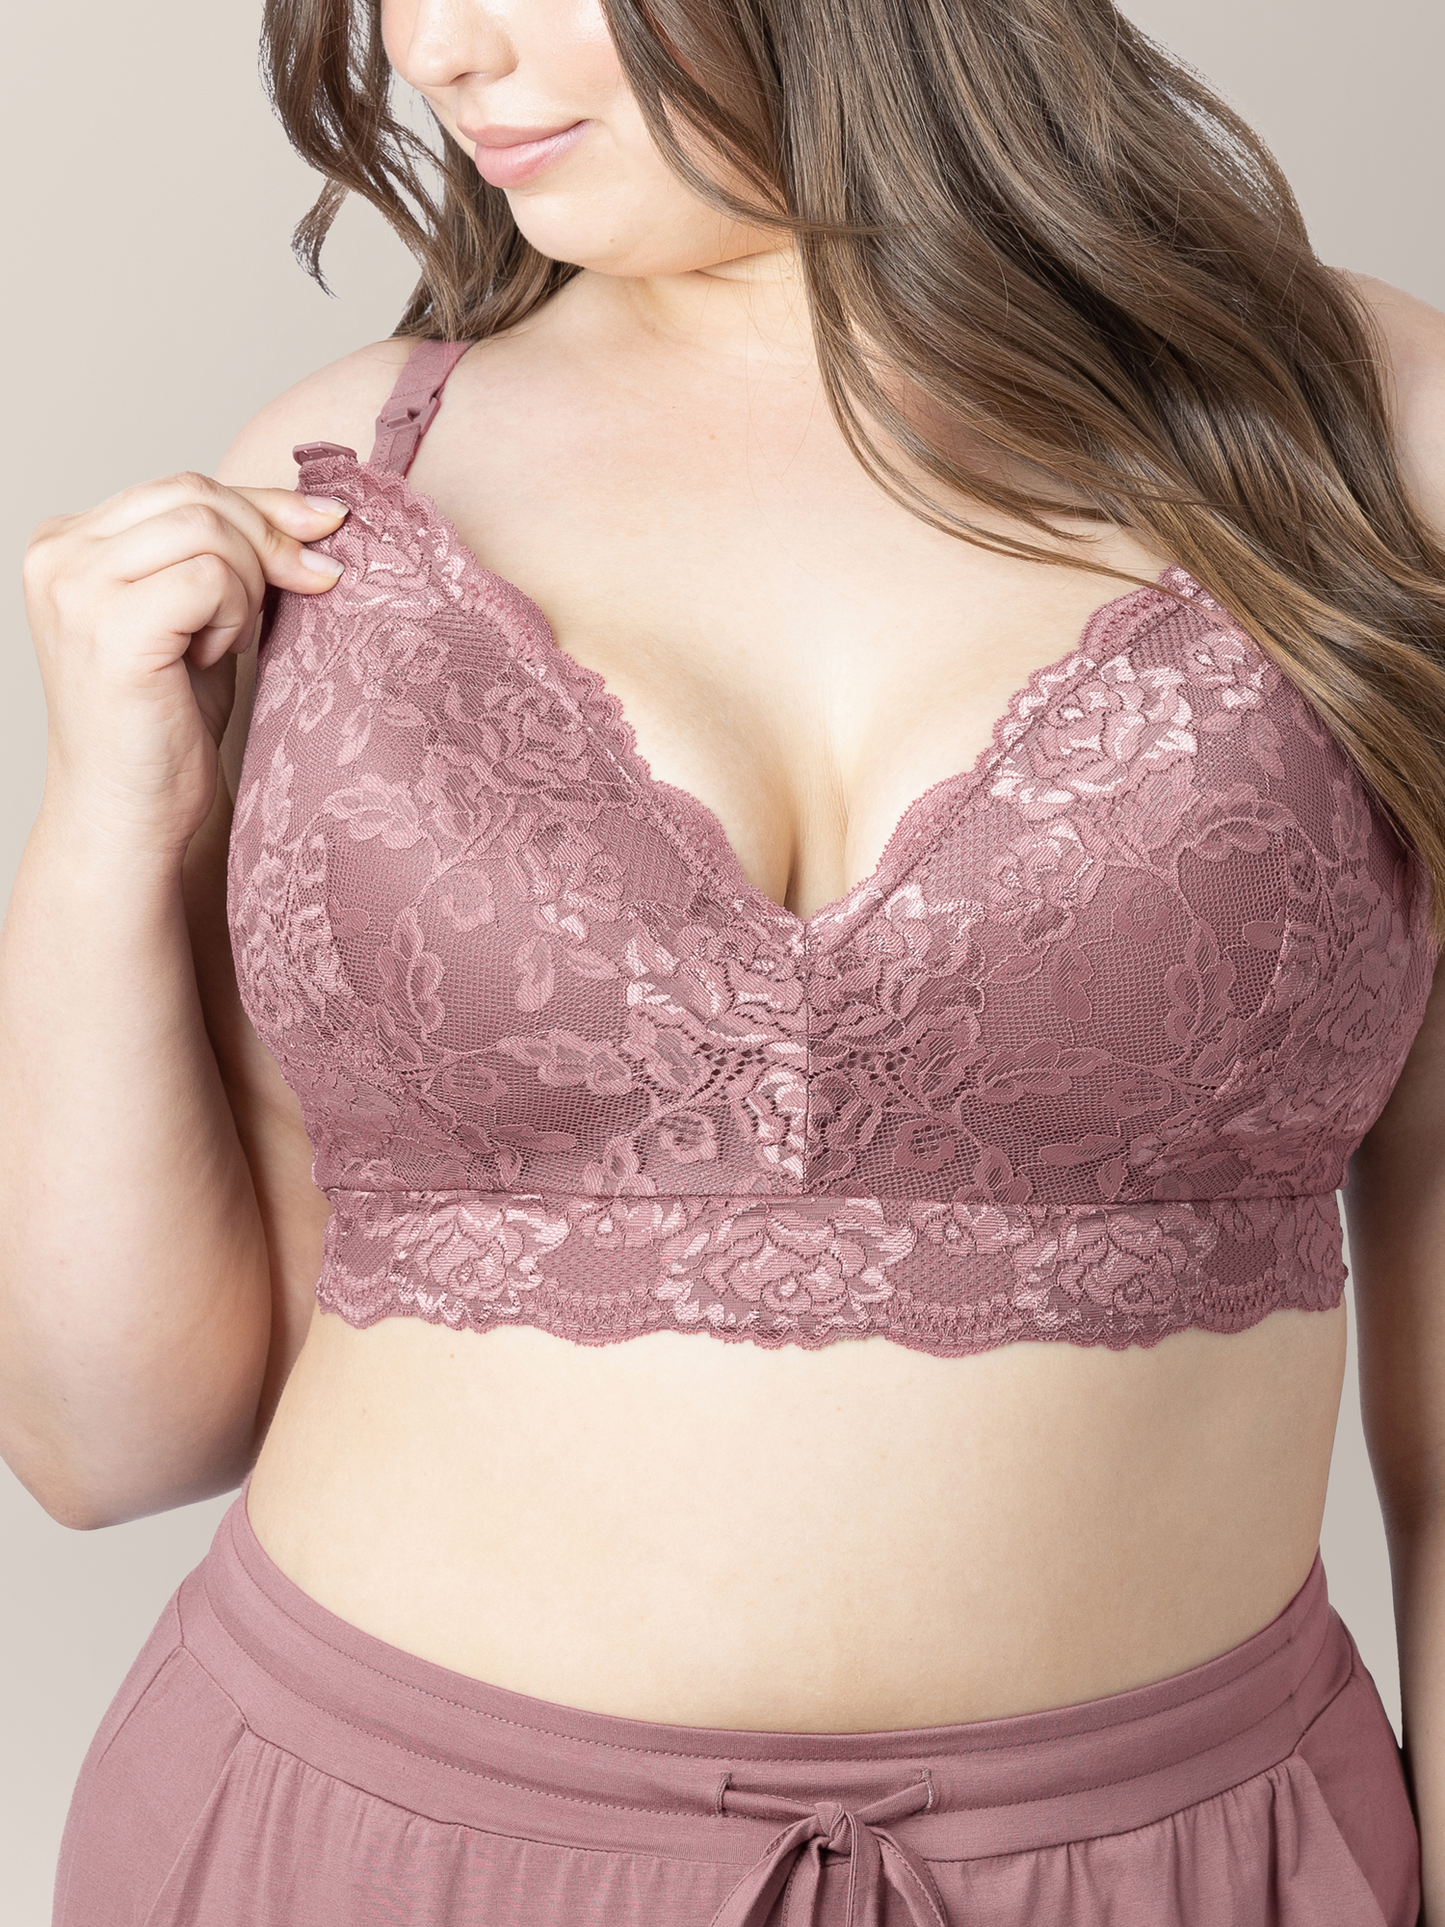 Model wearing the Lace Minimalist Nursing & Maternity Bra in Twilight looking at the easy clip down nursing access. 